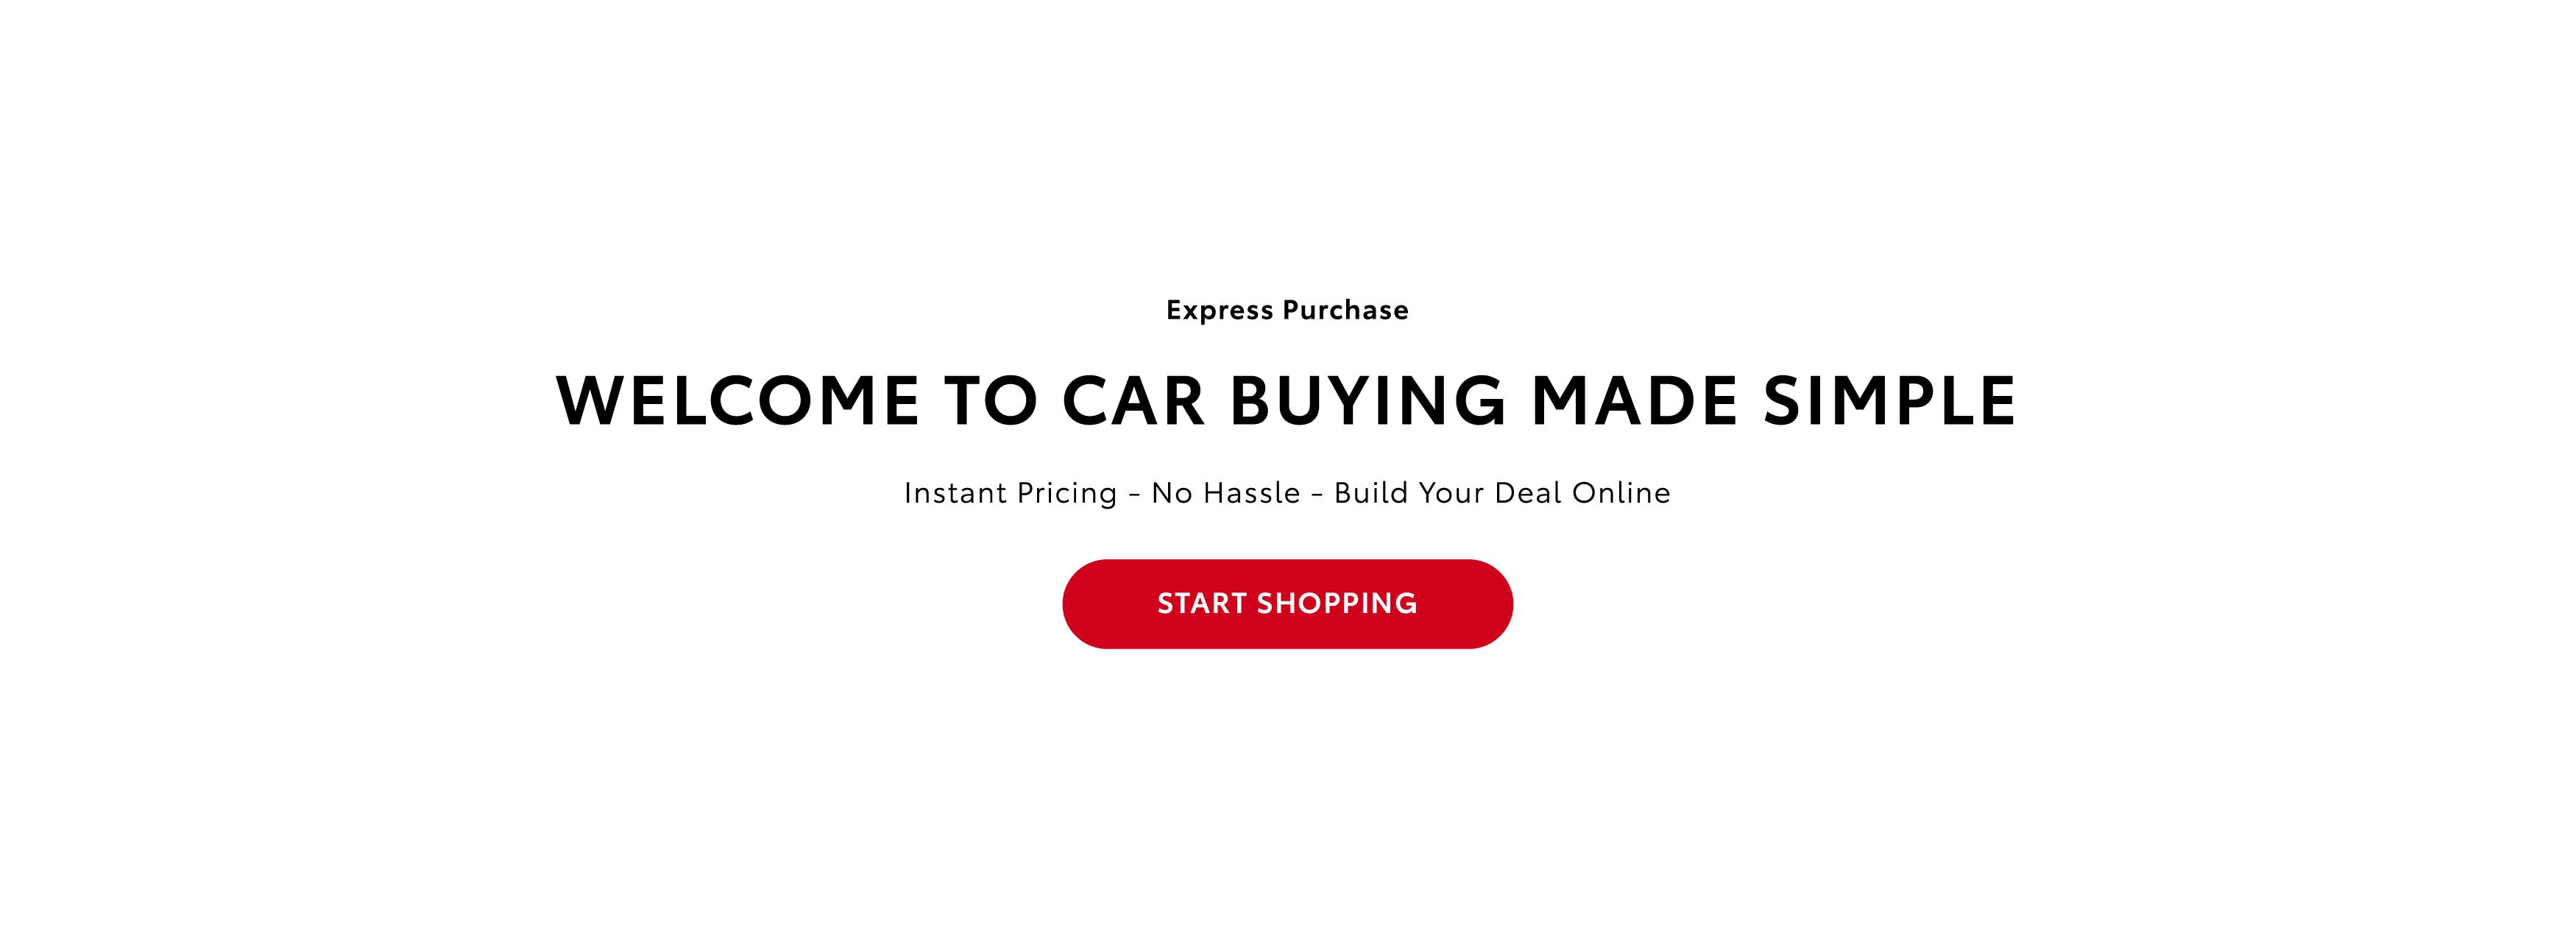 WEelcome to car buying made simple